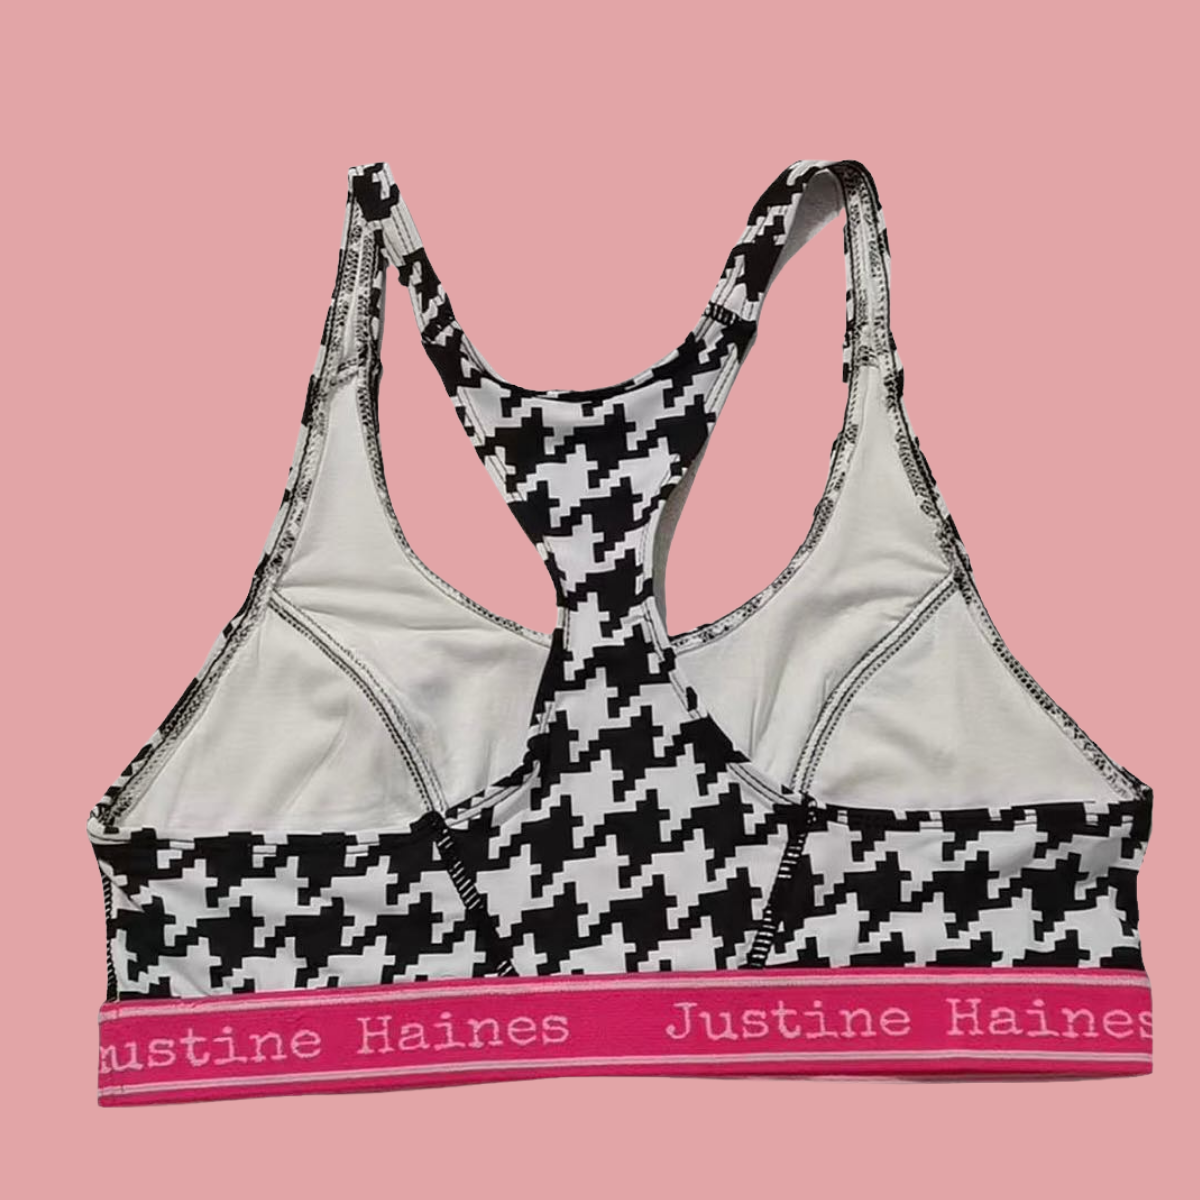 Wholesale Textured Houndstooth Jacquard TACTEL® X-Back Sports Bra for your  store - Faire